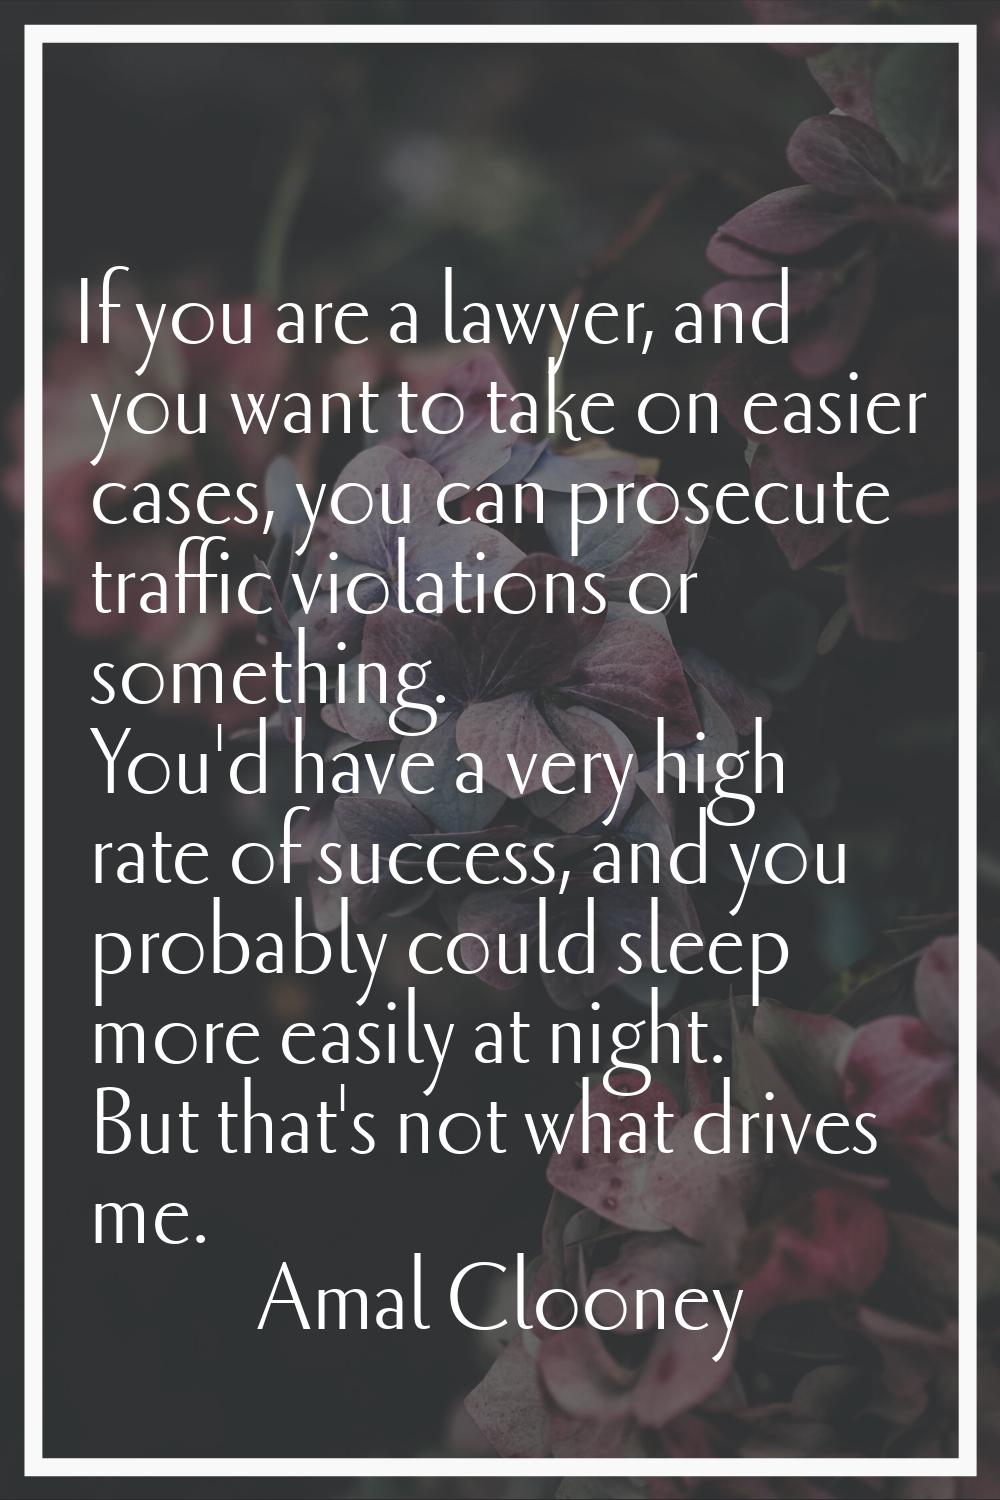 If you are a lawyer, and you want to take on easier cases, you can prosecute traffic violations or 